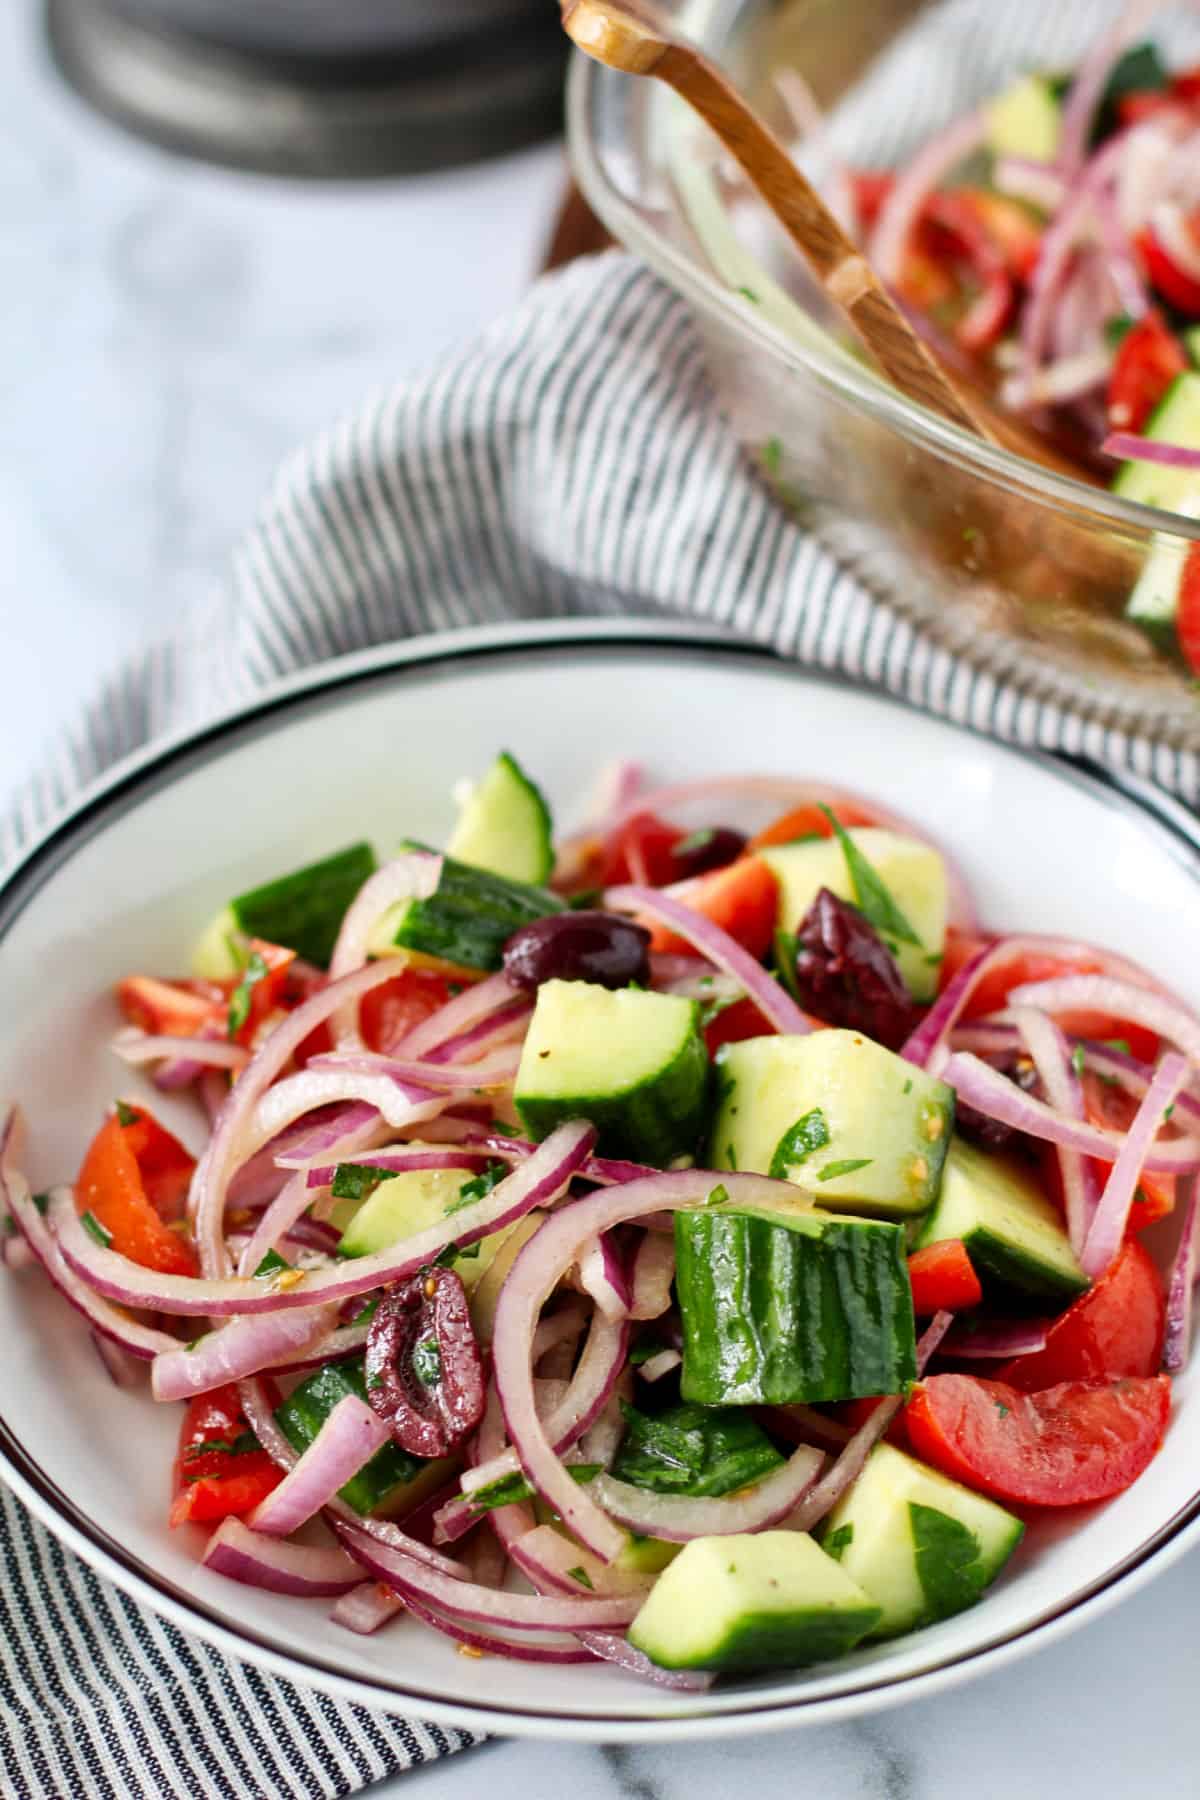 Greek salad with olive oil and lemon dressing in a bowl.